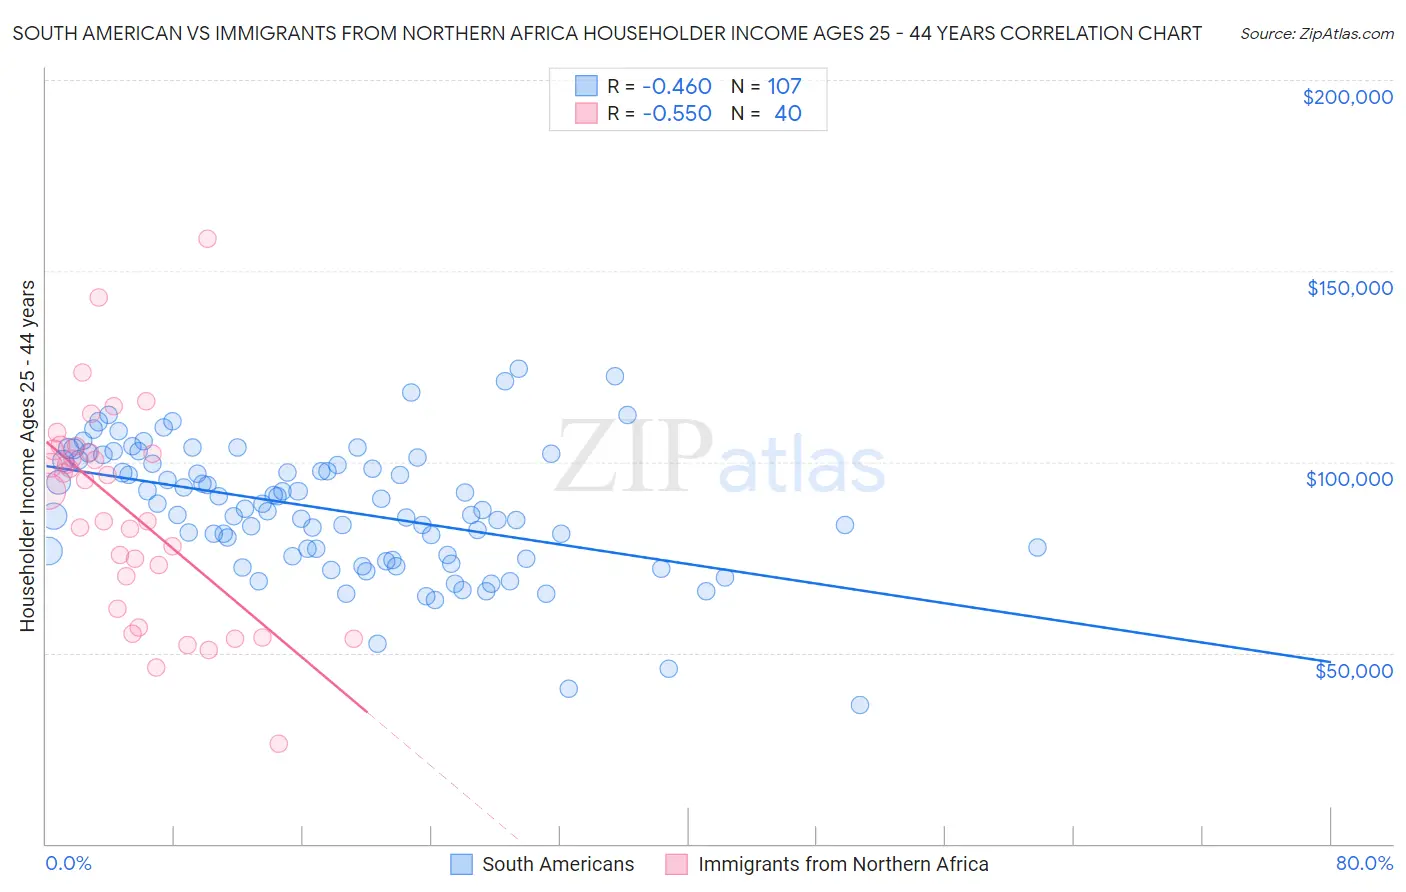 South American vs Immigrants from Northern Africa Householder Income Ages 25 - 44 years